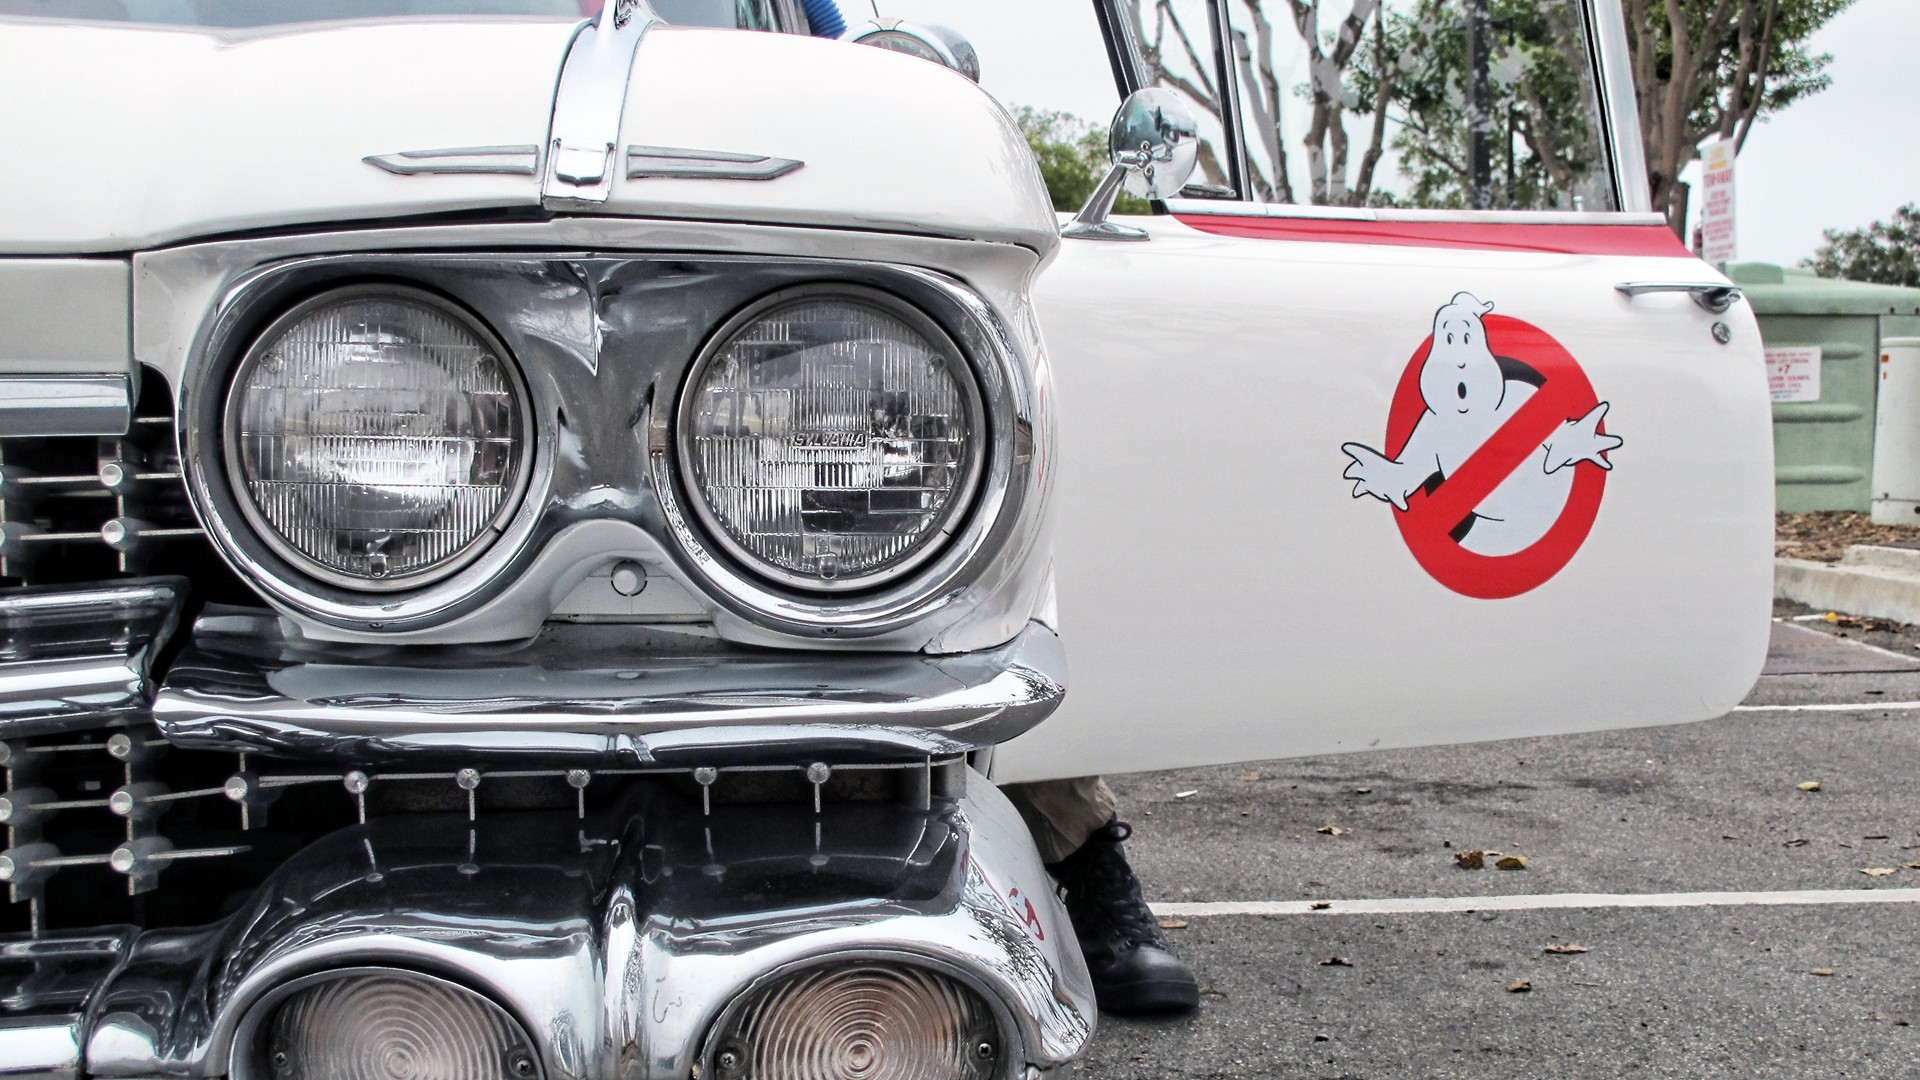 General 1920x1080 Ghostbusters car spooky Movie Vehicles Ecto-1 (Ghostbusters) logo vehicle